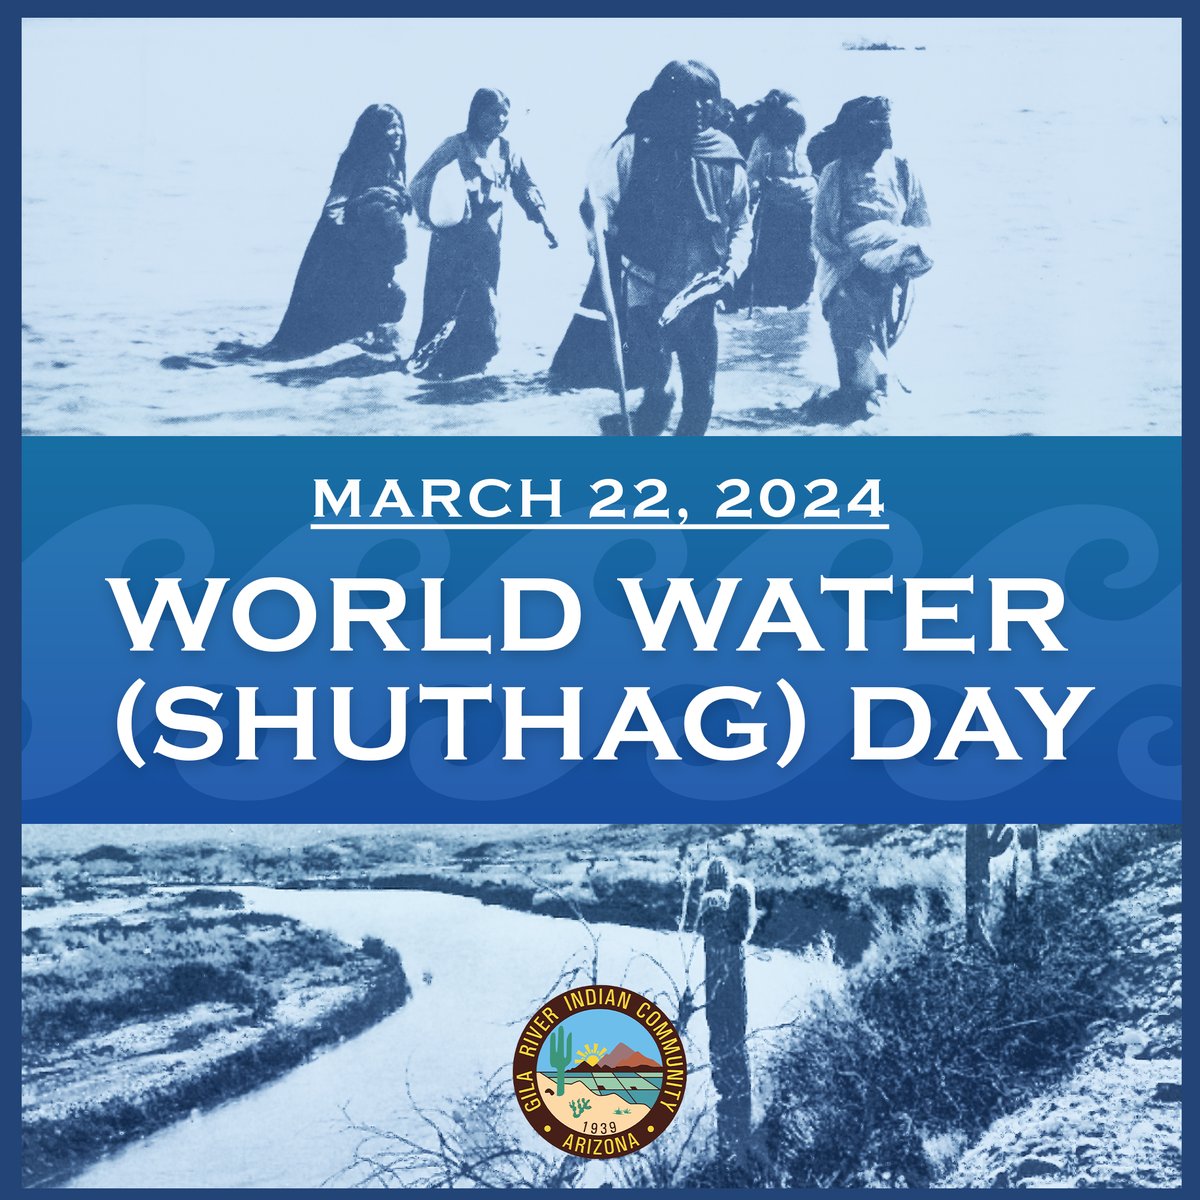 Happy #WorldWaterDay! Today, we honor the significance of water, Shuthag, in our Community as Akimel O'otham and Pee-Posh.